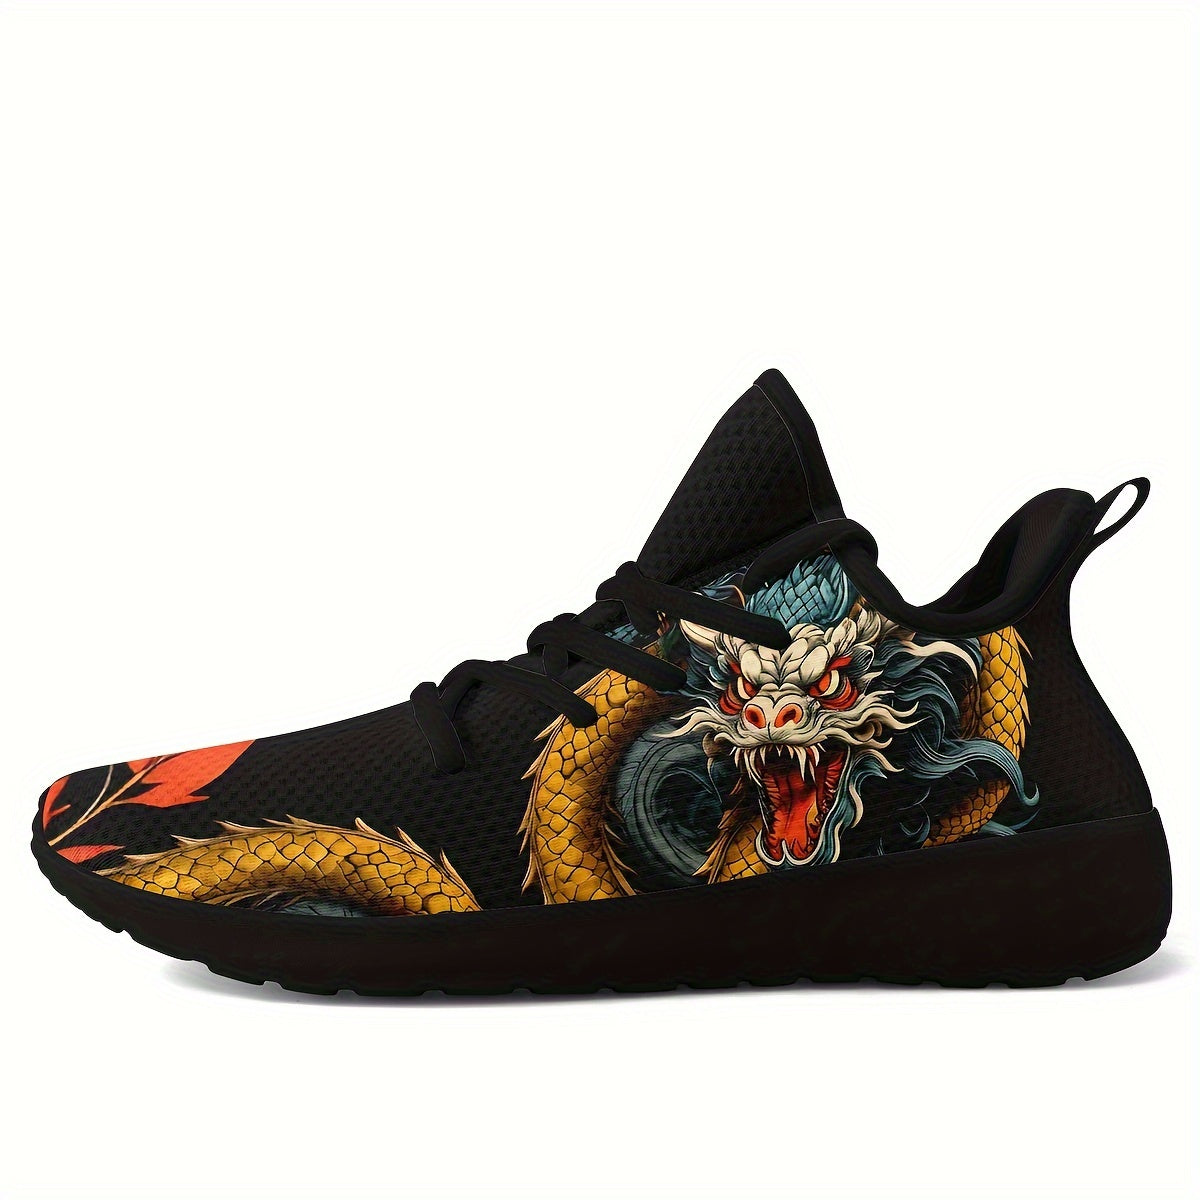 Chinese Dragon Graphic Knit Running Shoes, Shock Absorption